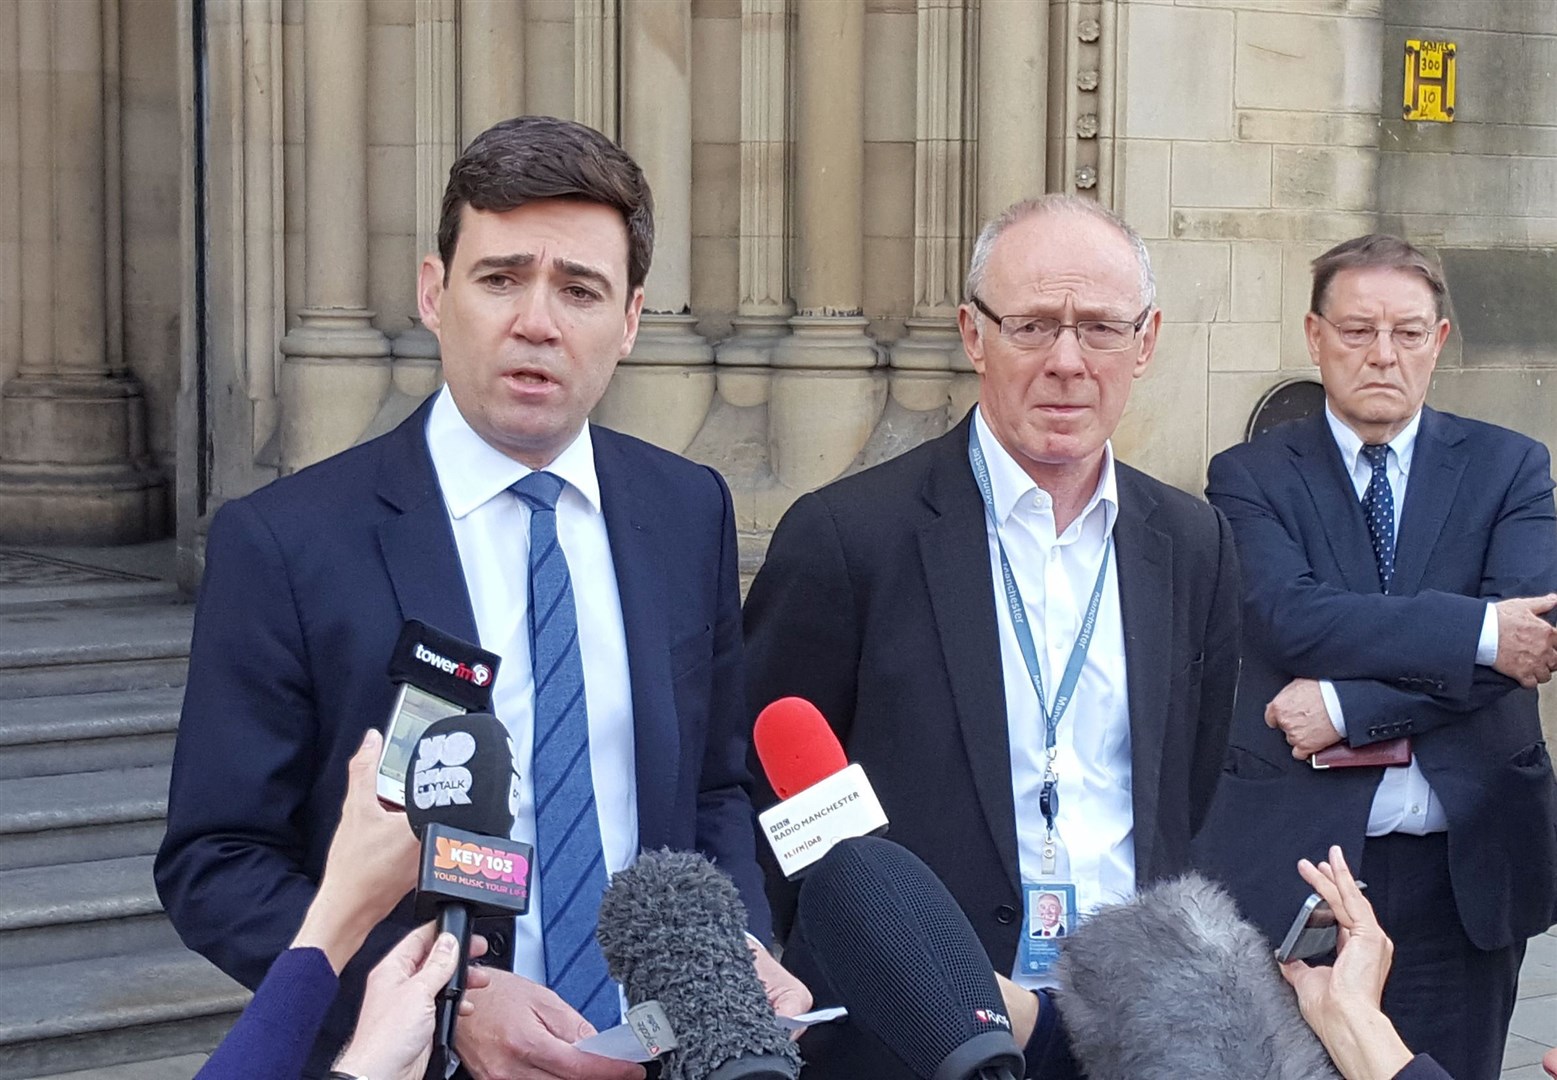 Mayor of Greater Manchester Andy Burnham and Manchester City Council Leader Sir Richard Leese have called for more support for businesses (Dave Higgens/PA)